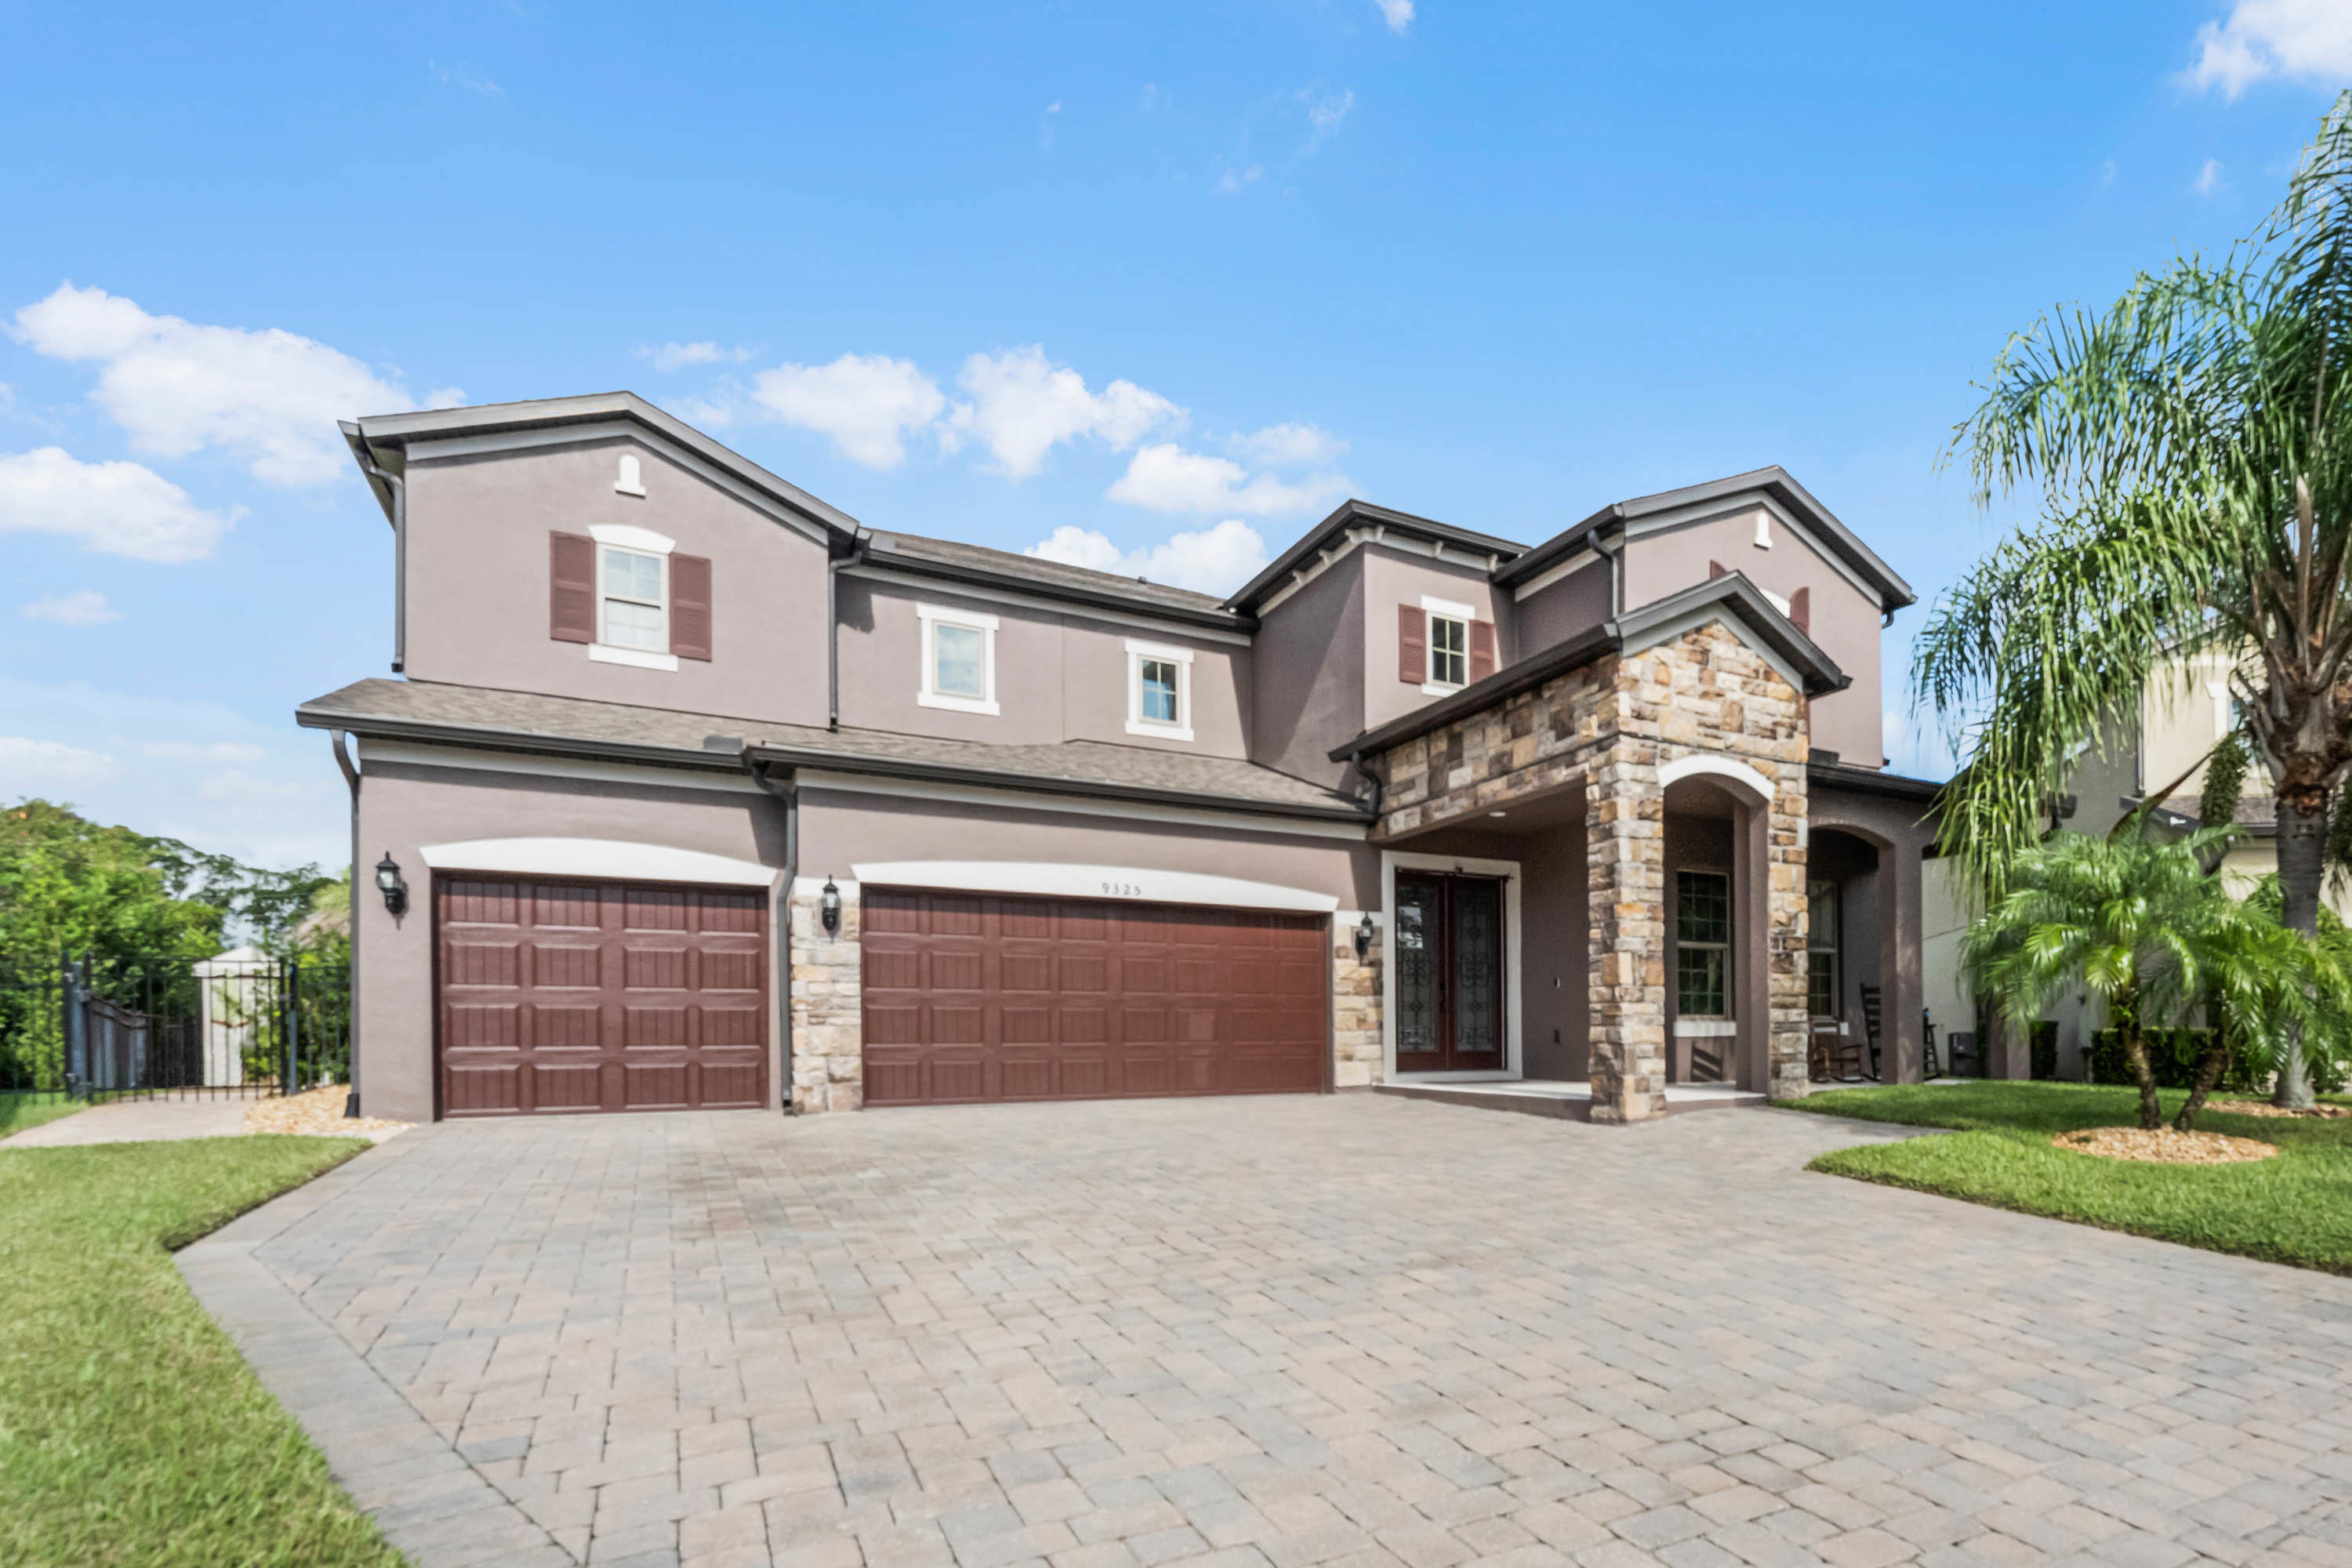 two story home with three car garage and brownish red accent paint